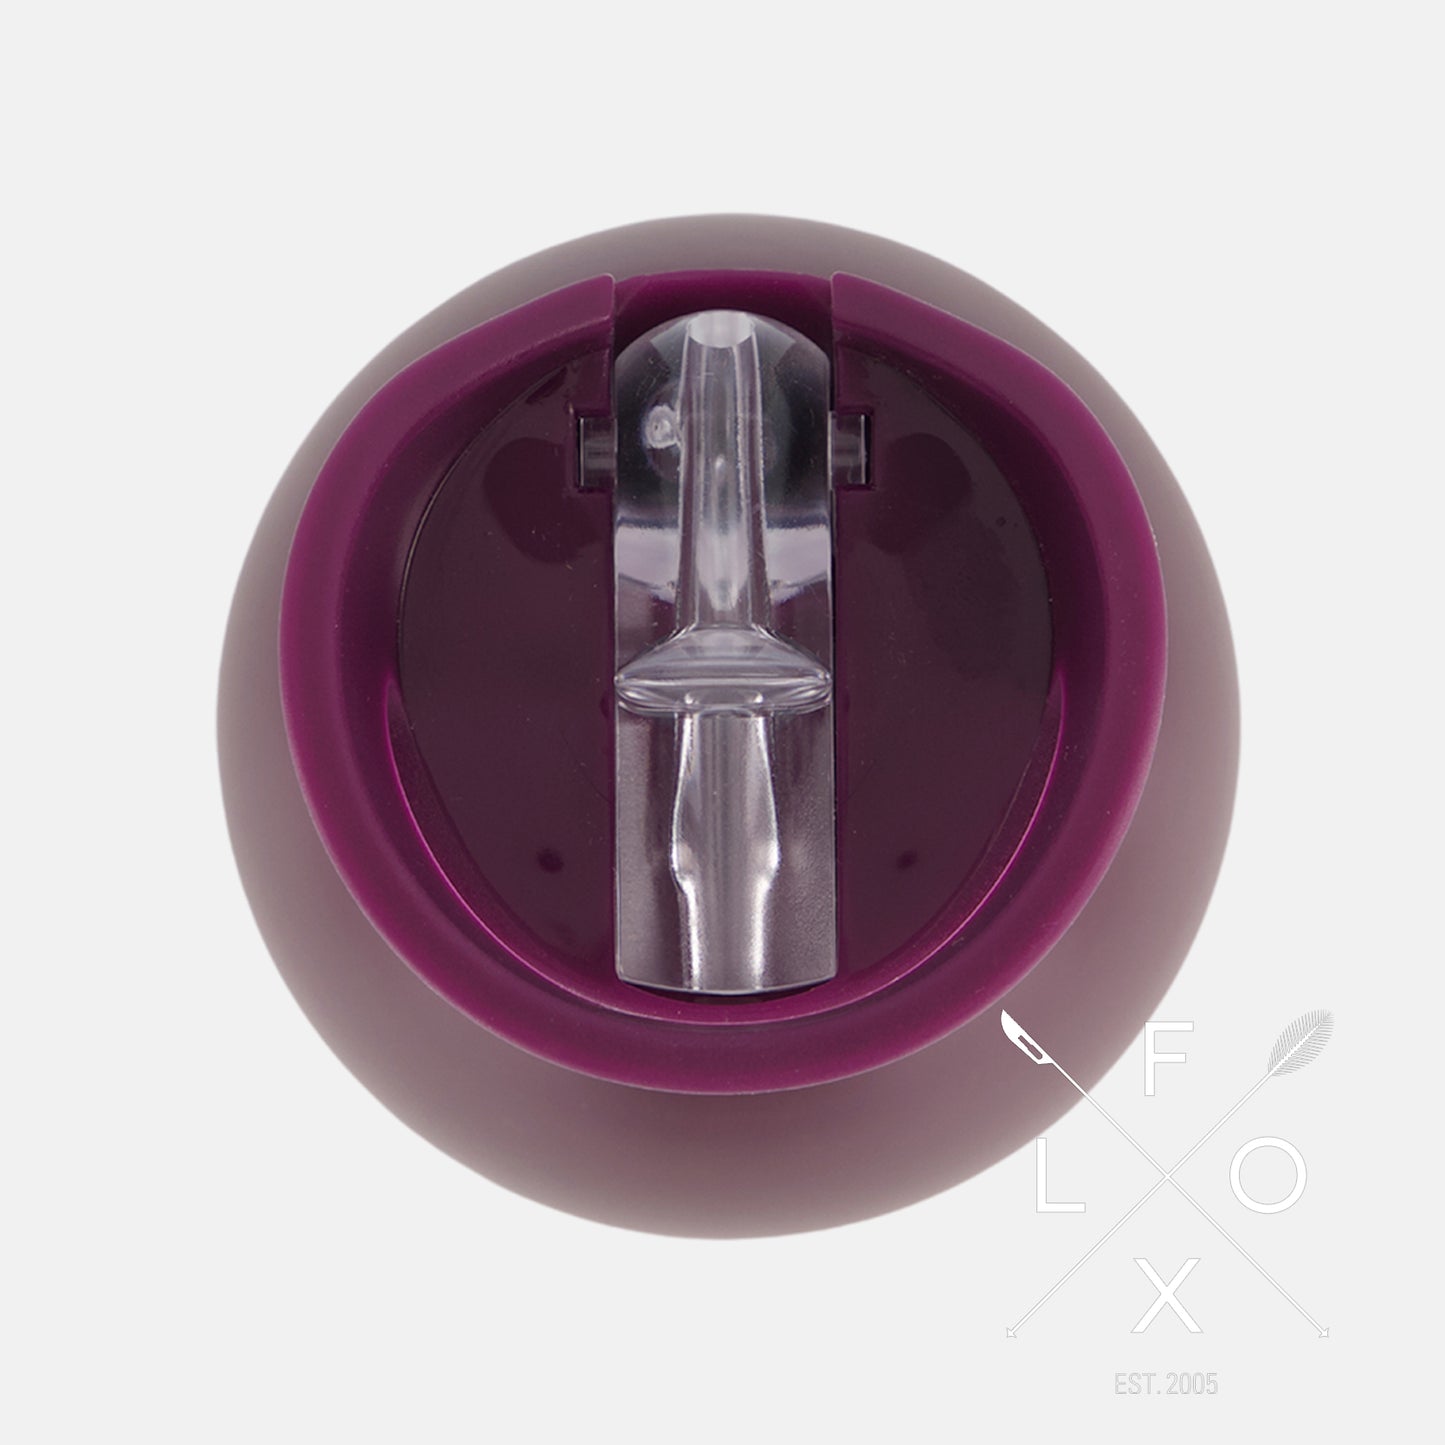 Birds eye view of a burgundy coloured drink bottle showing the clear sipper piece.